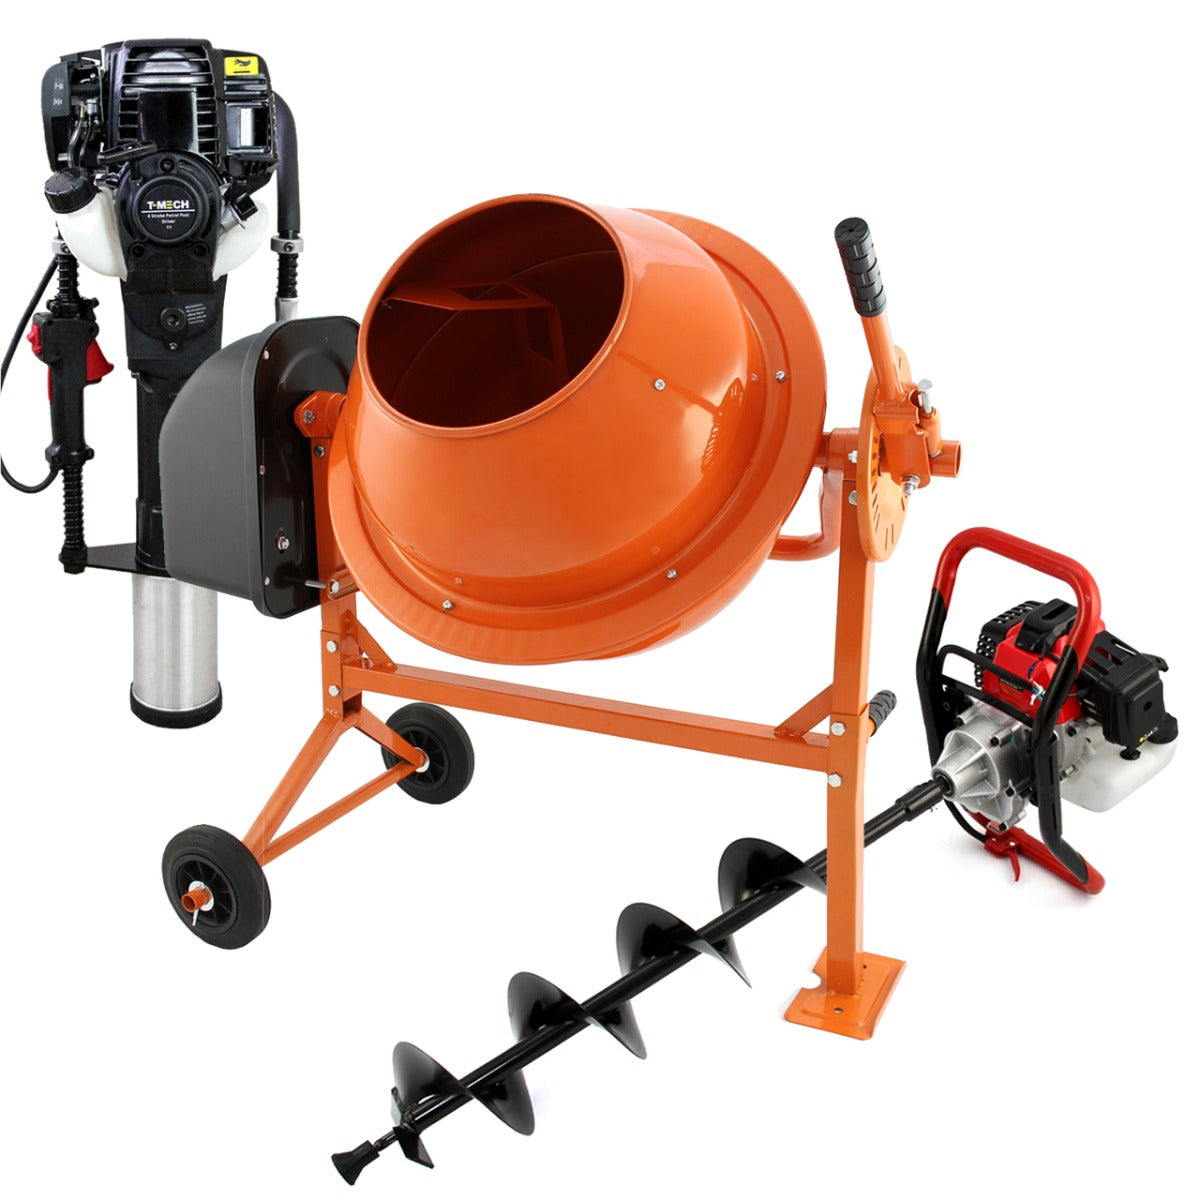 T-Mech Earth Auger, Cement Mixer and 2 Stroke Post Driver - Like New